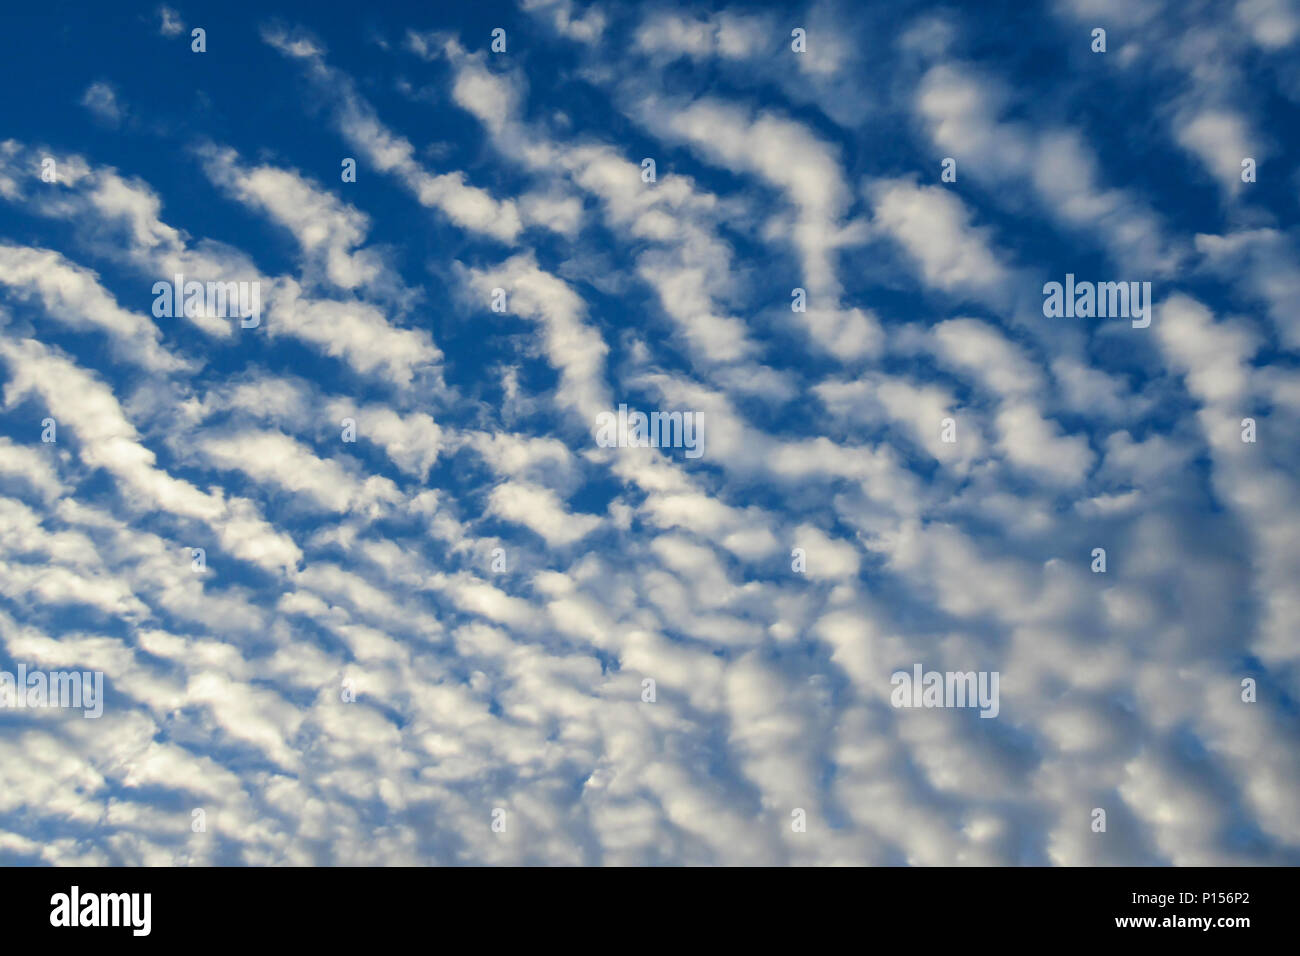 Overcast clouds covering the sky. Stock Photo